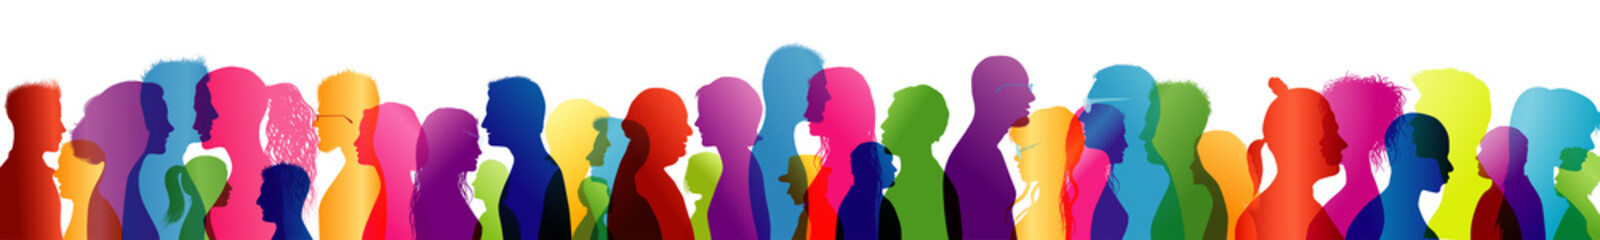 Crowd talking. Group of people talking. To communicate. Speak. Colored silhouette profiles